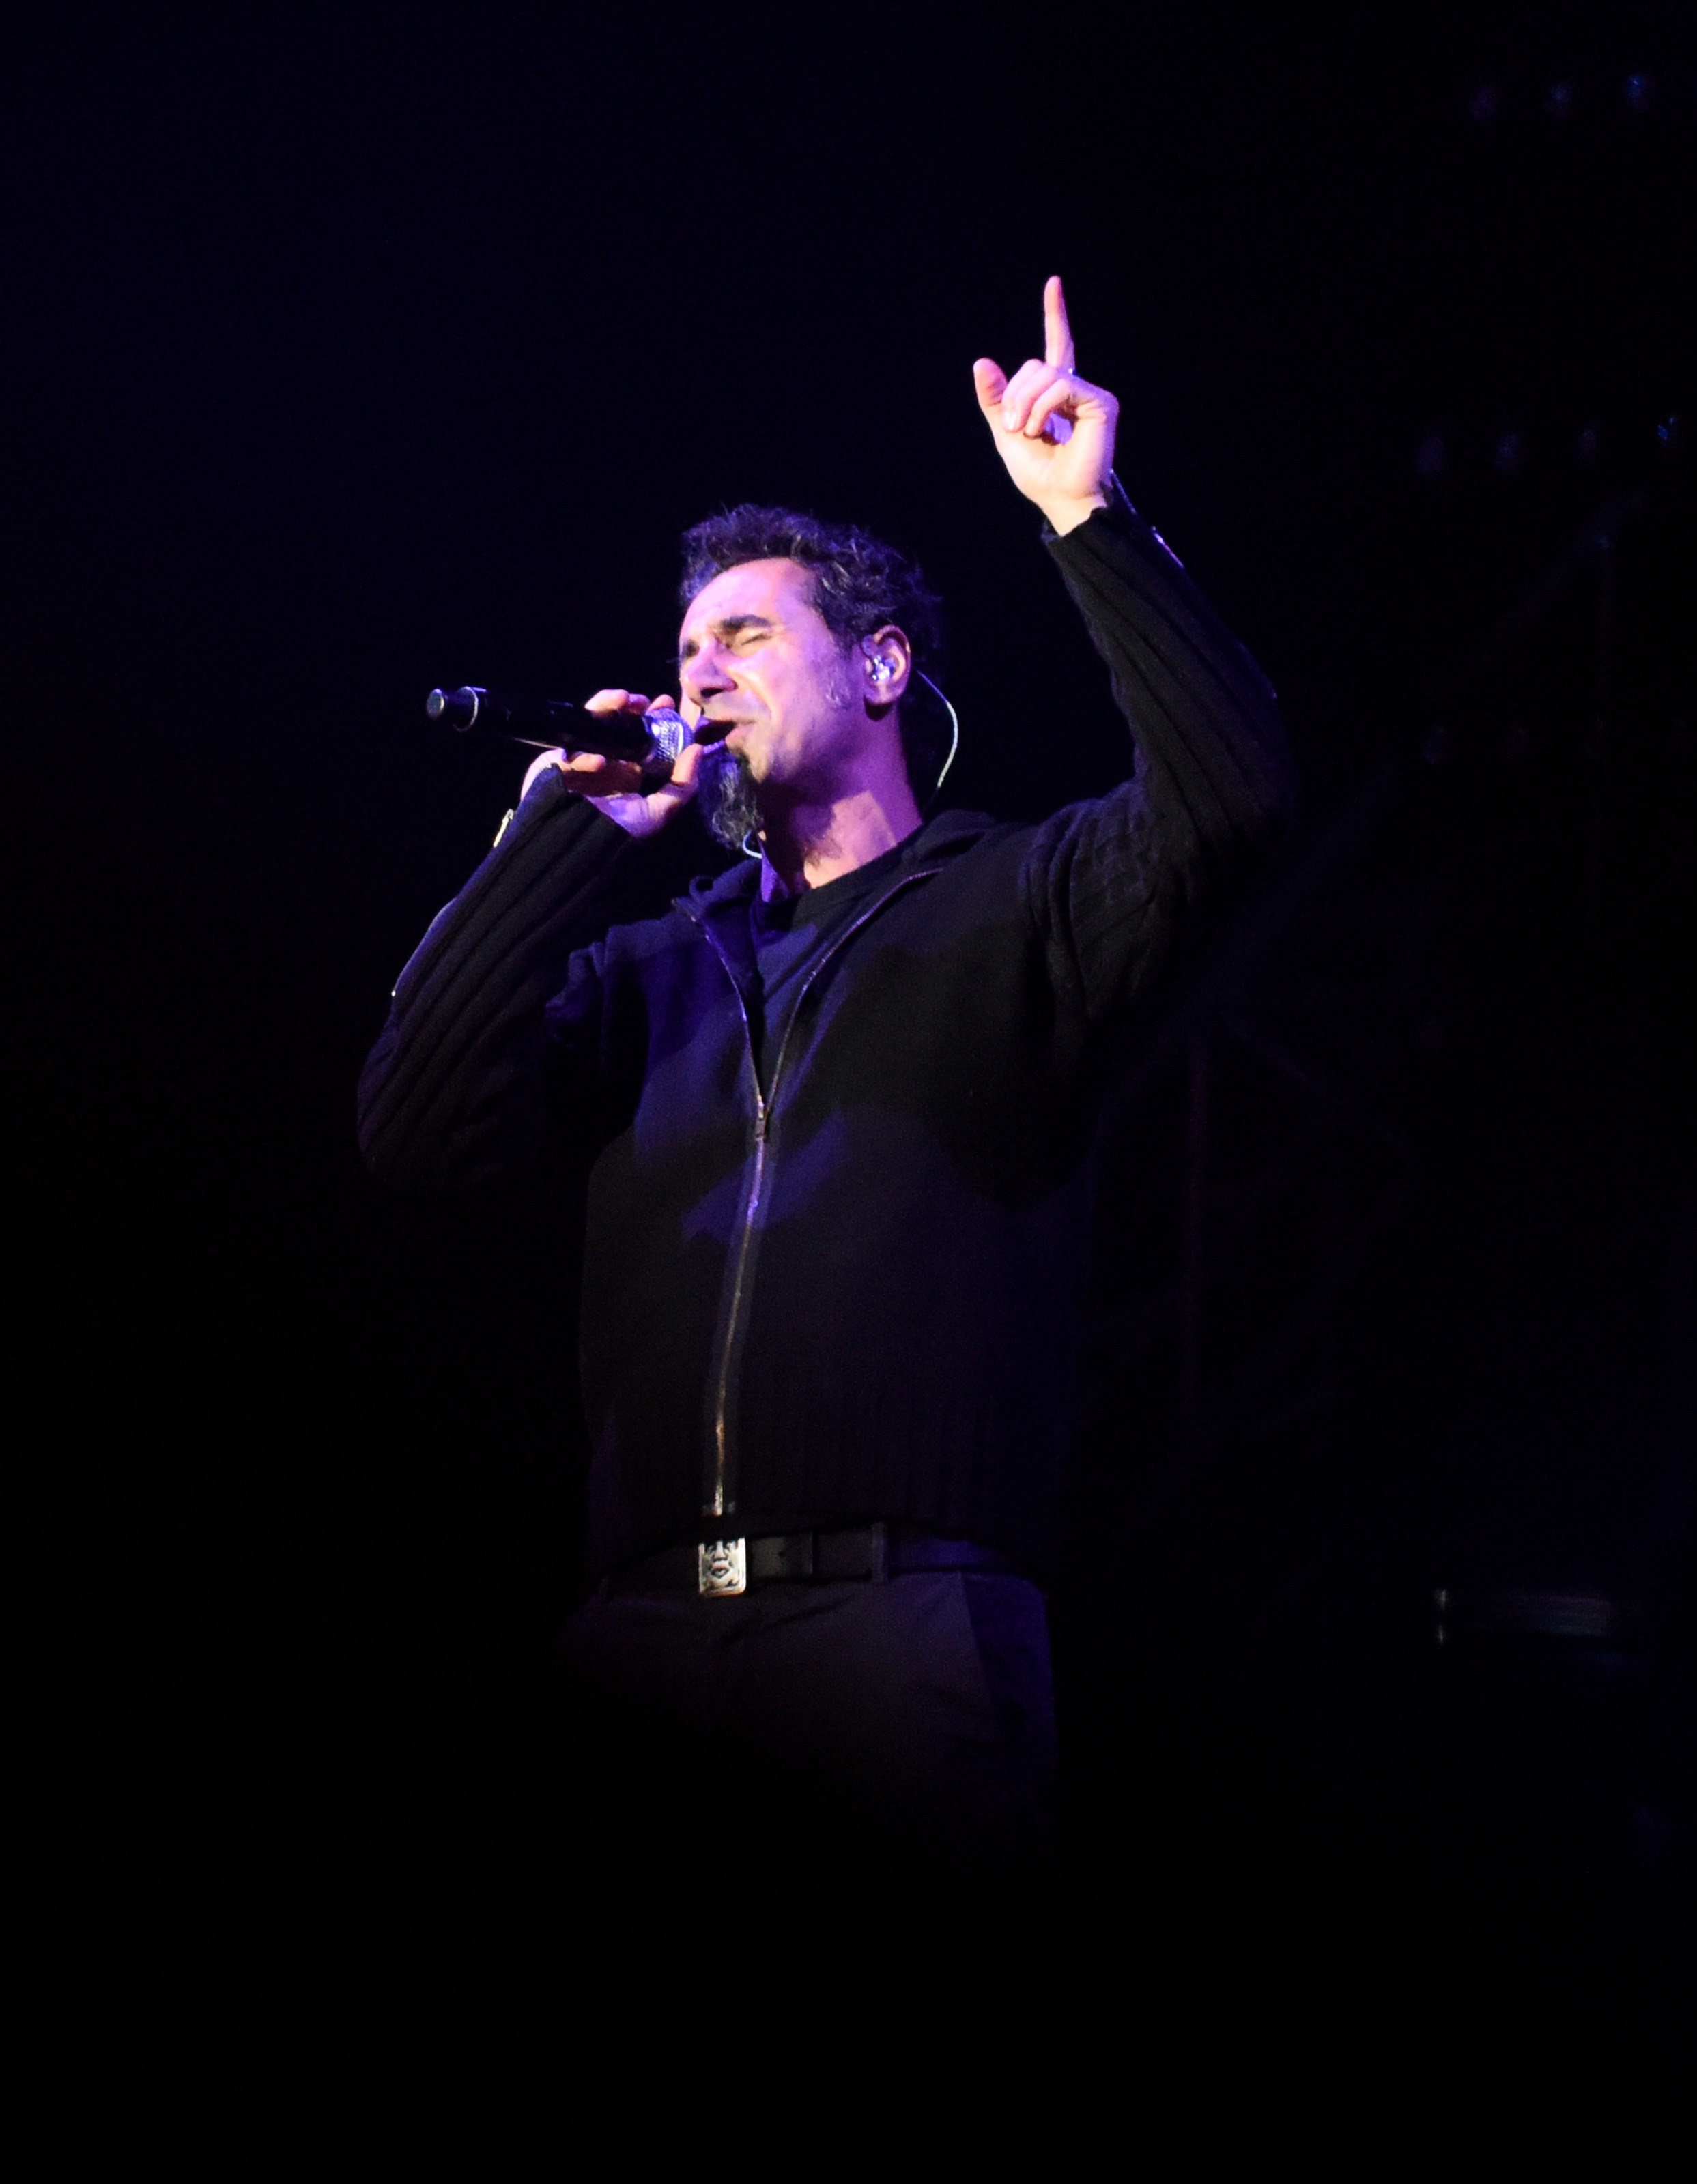 Serj Tankian of the hard rock band System of a Down performs at Yerevan's Republic Square on April 23, 2015.